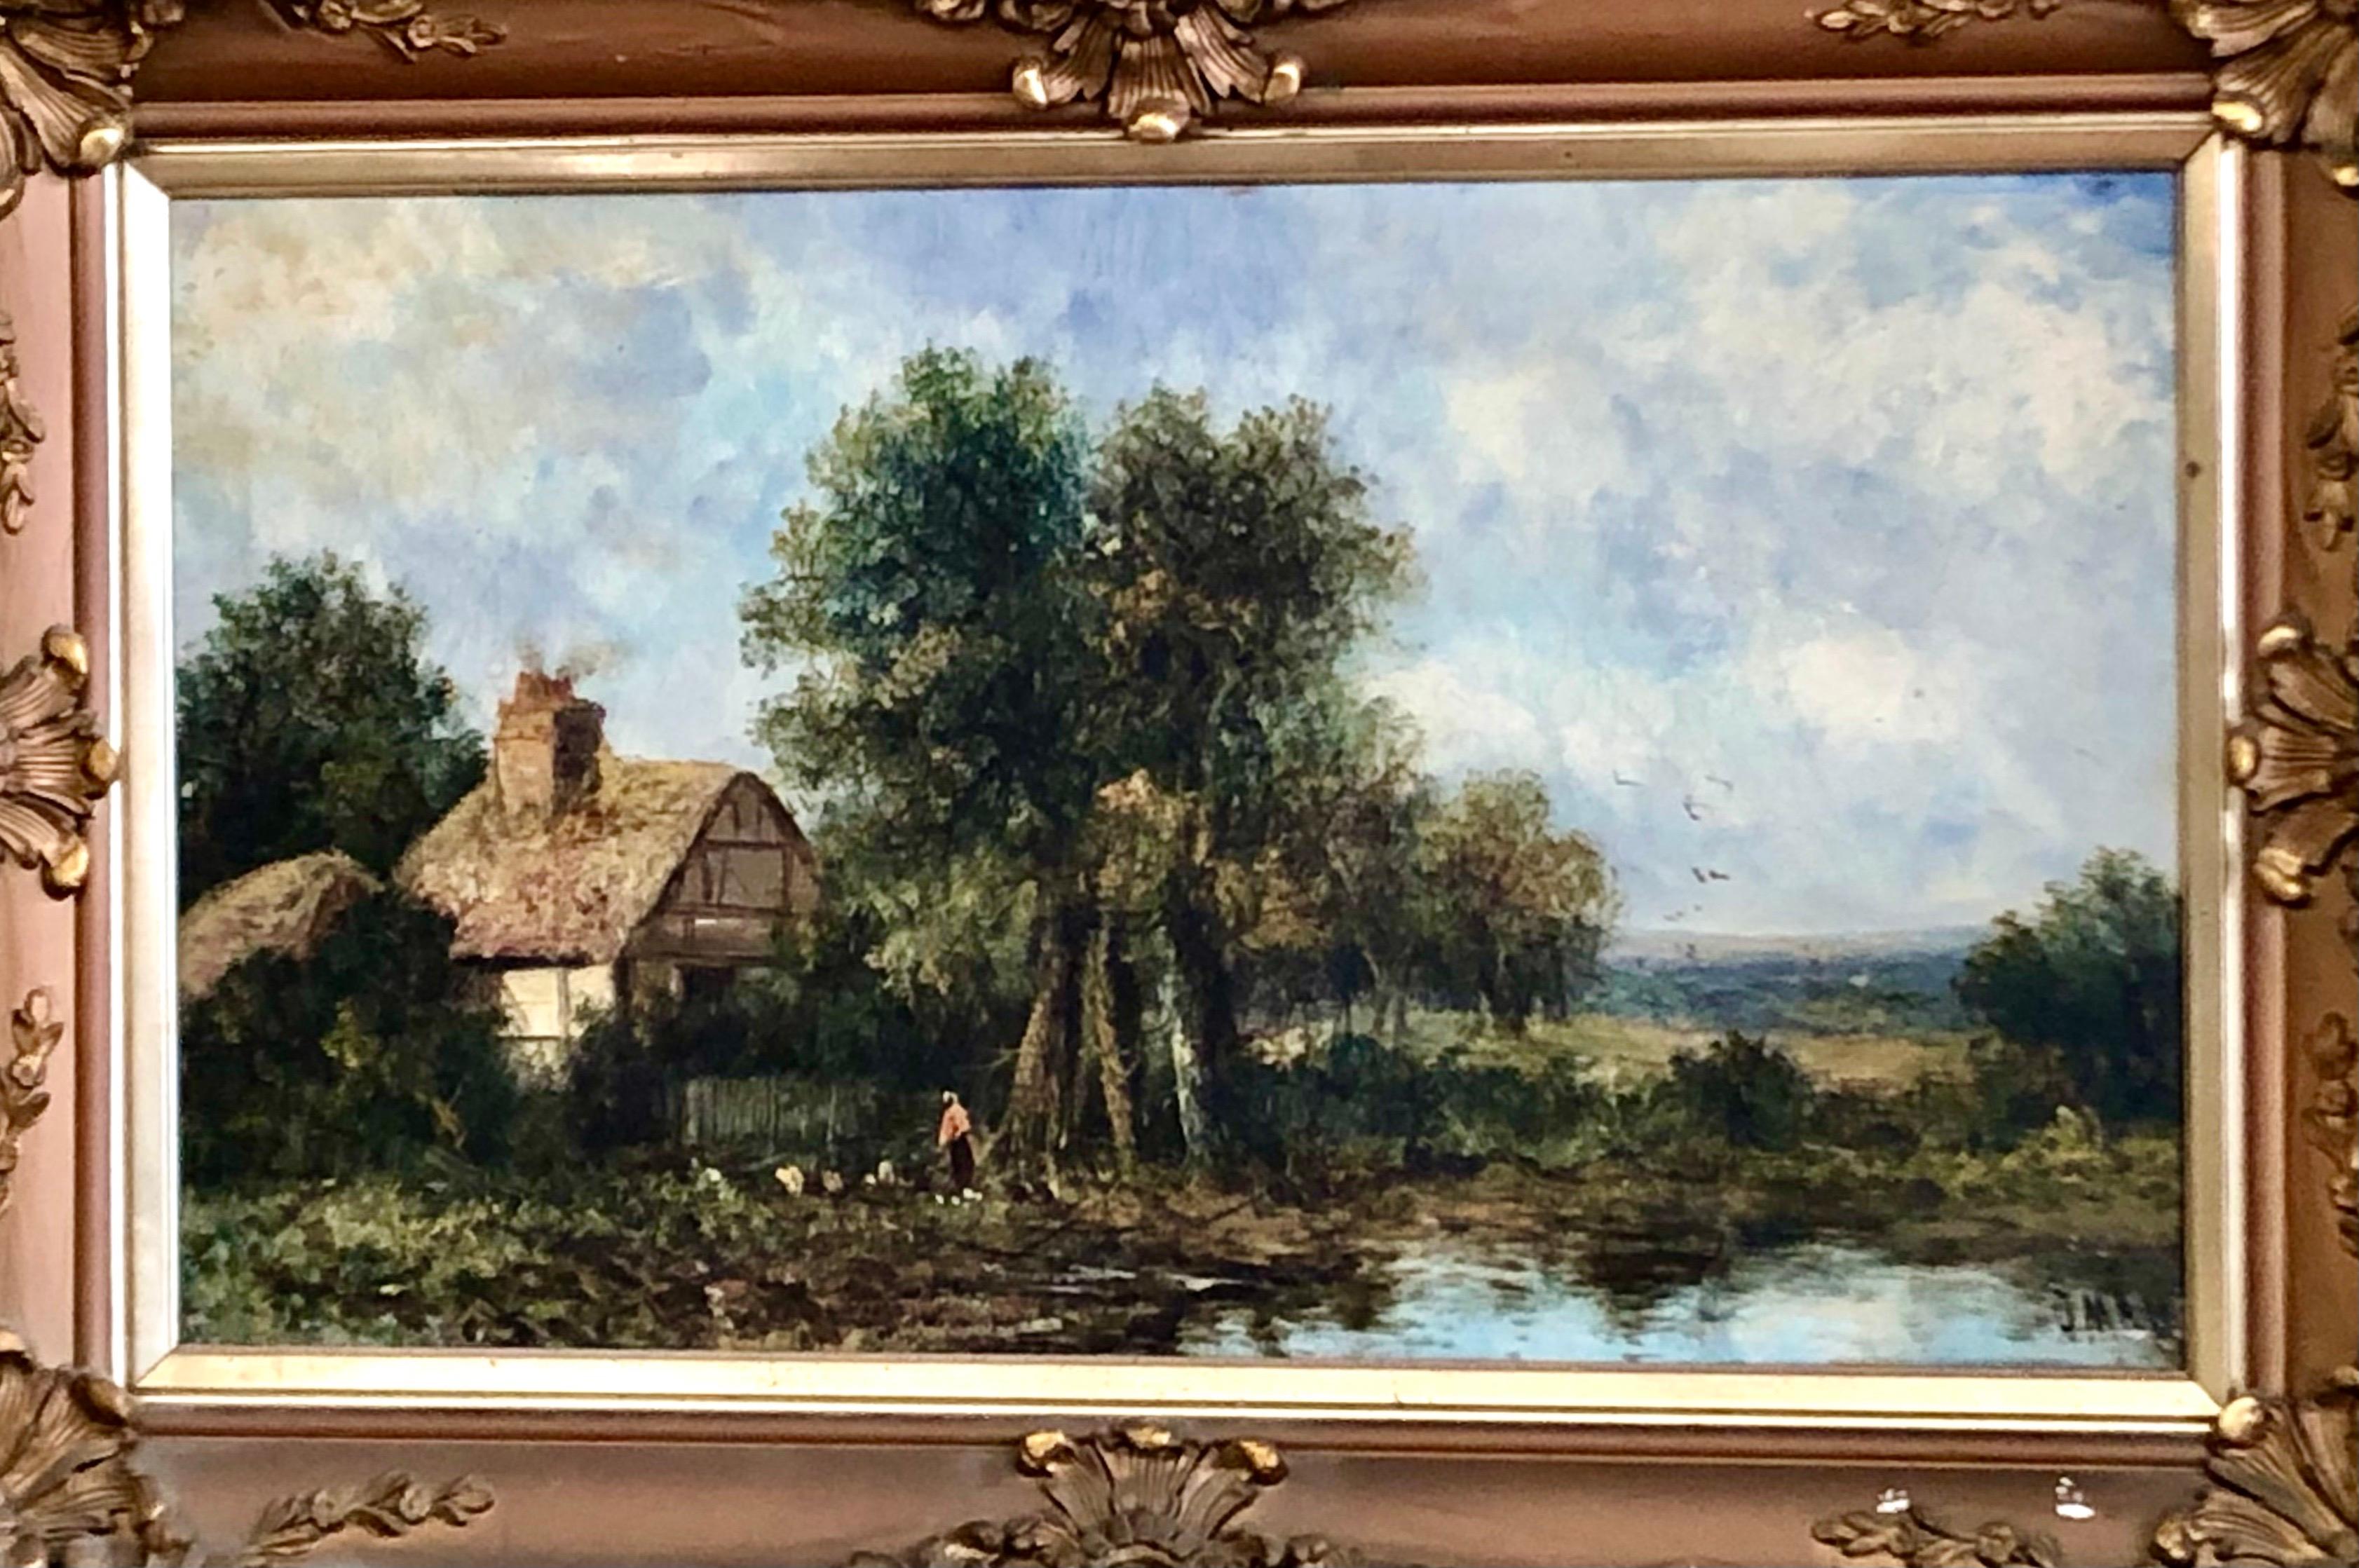 A lovely British 19th century original oil on canvas in its original gilt carved wood and gesso frame (some a/f to frame as illustrated). A wonderful, pastoral landscape of a thatched cottage by a lake; well done by a talented 19th century artist.